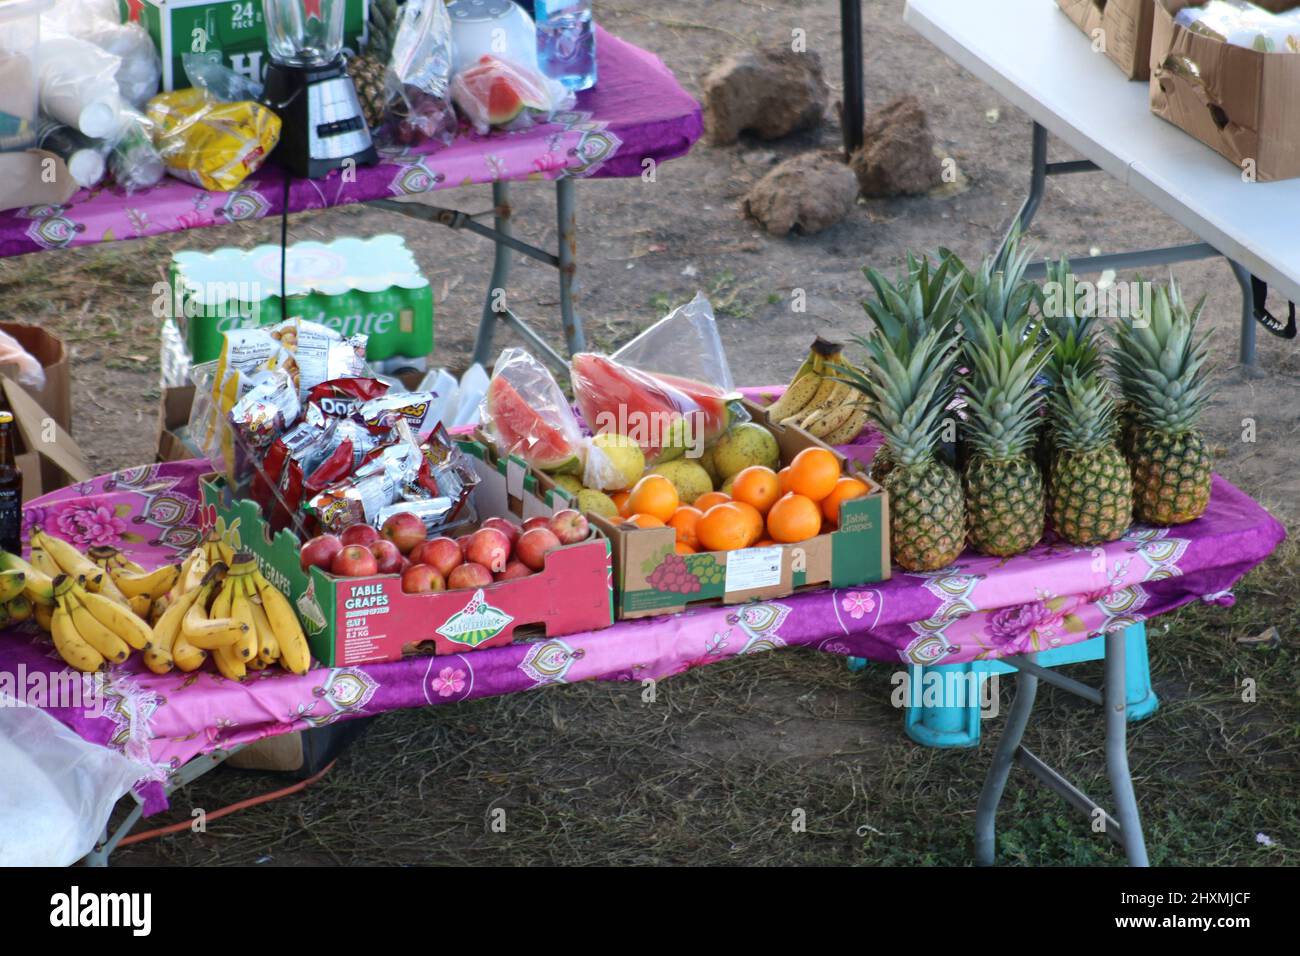 Display of Caribbean fruit including pineapples and bananas Stock Photo